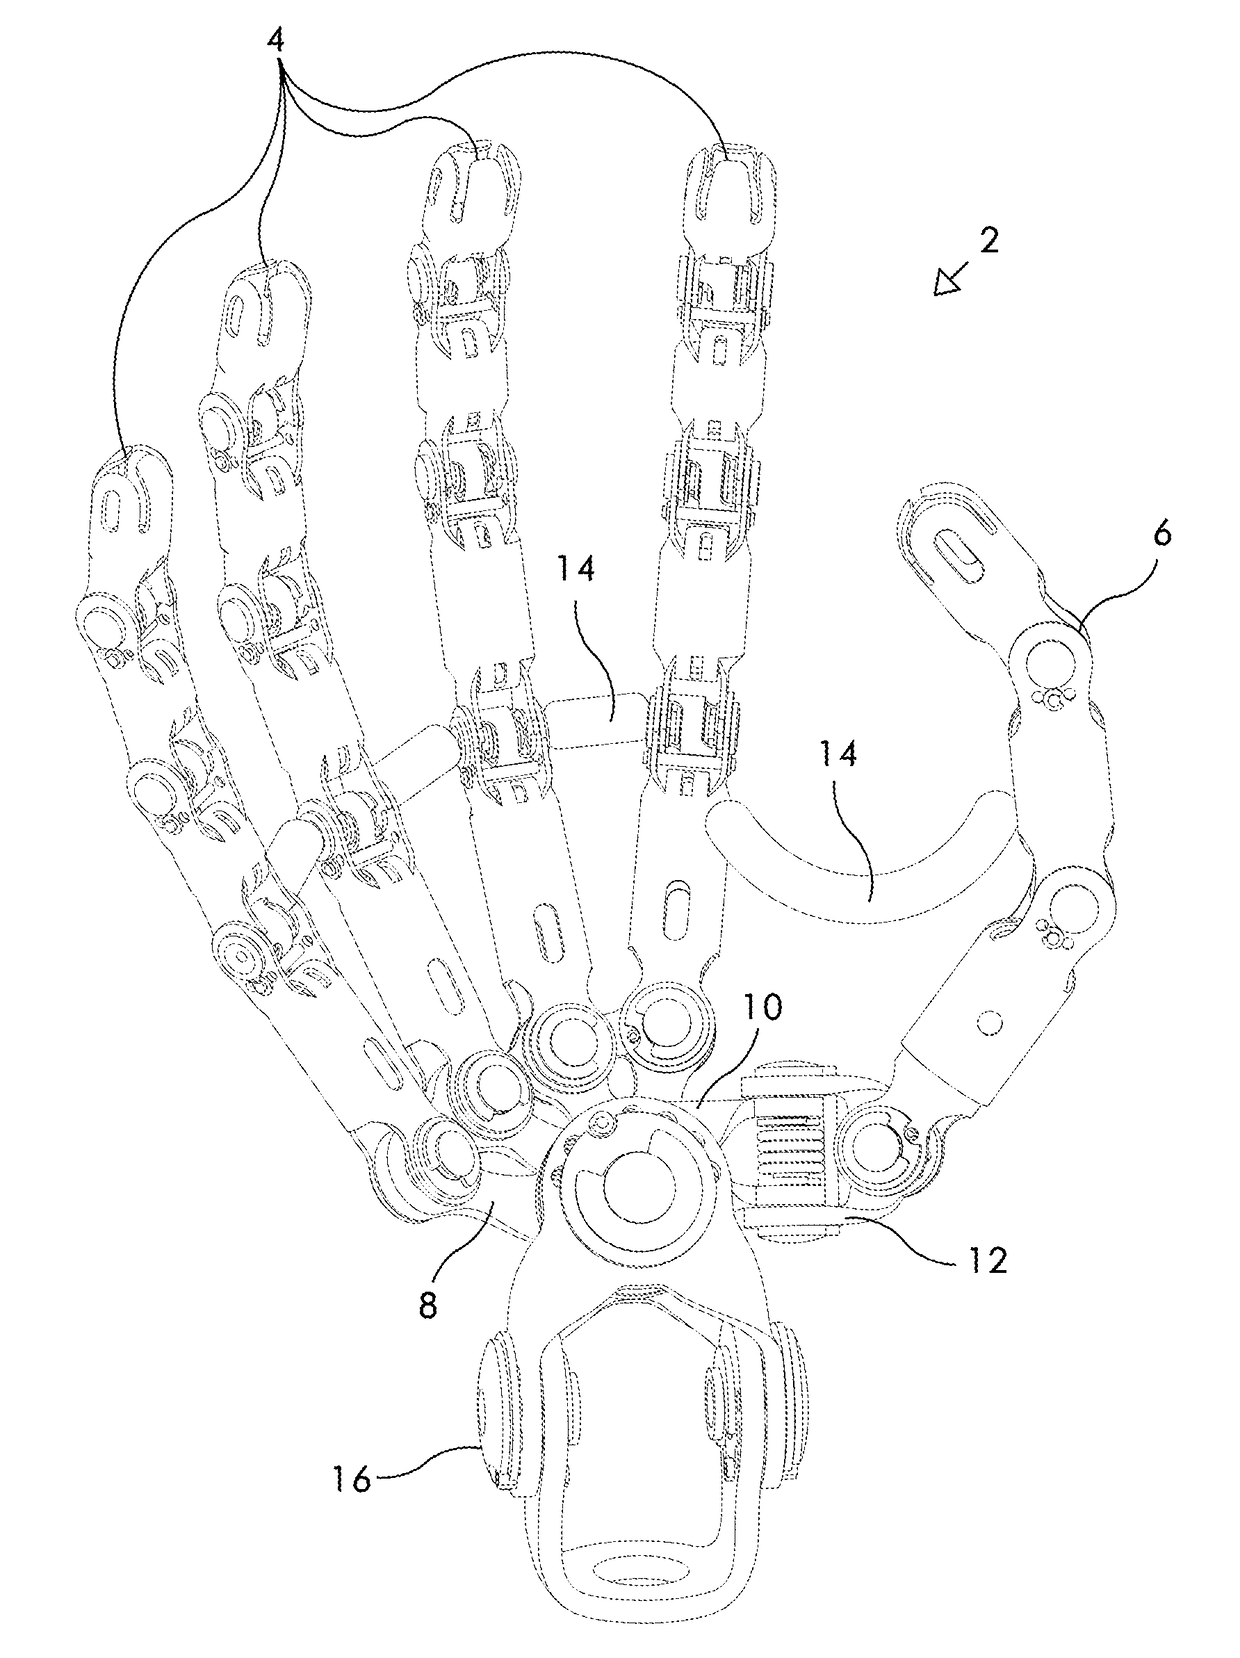 Mechanical grasping device